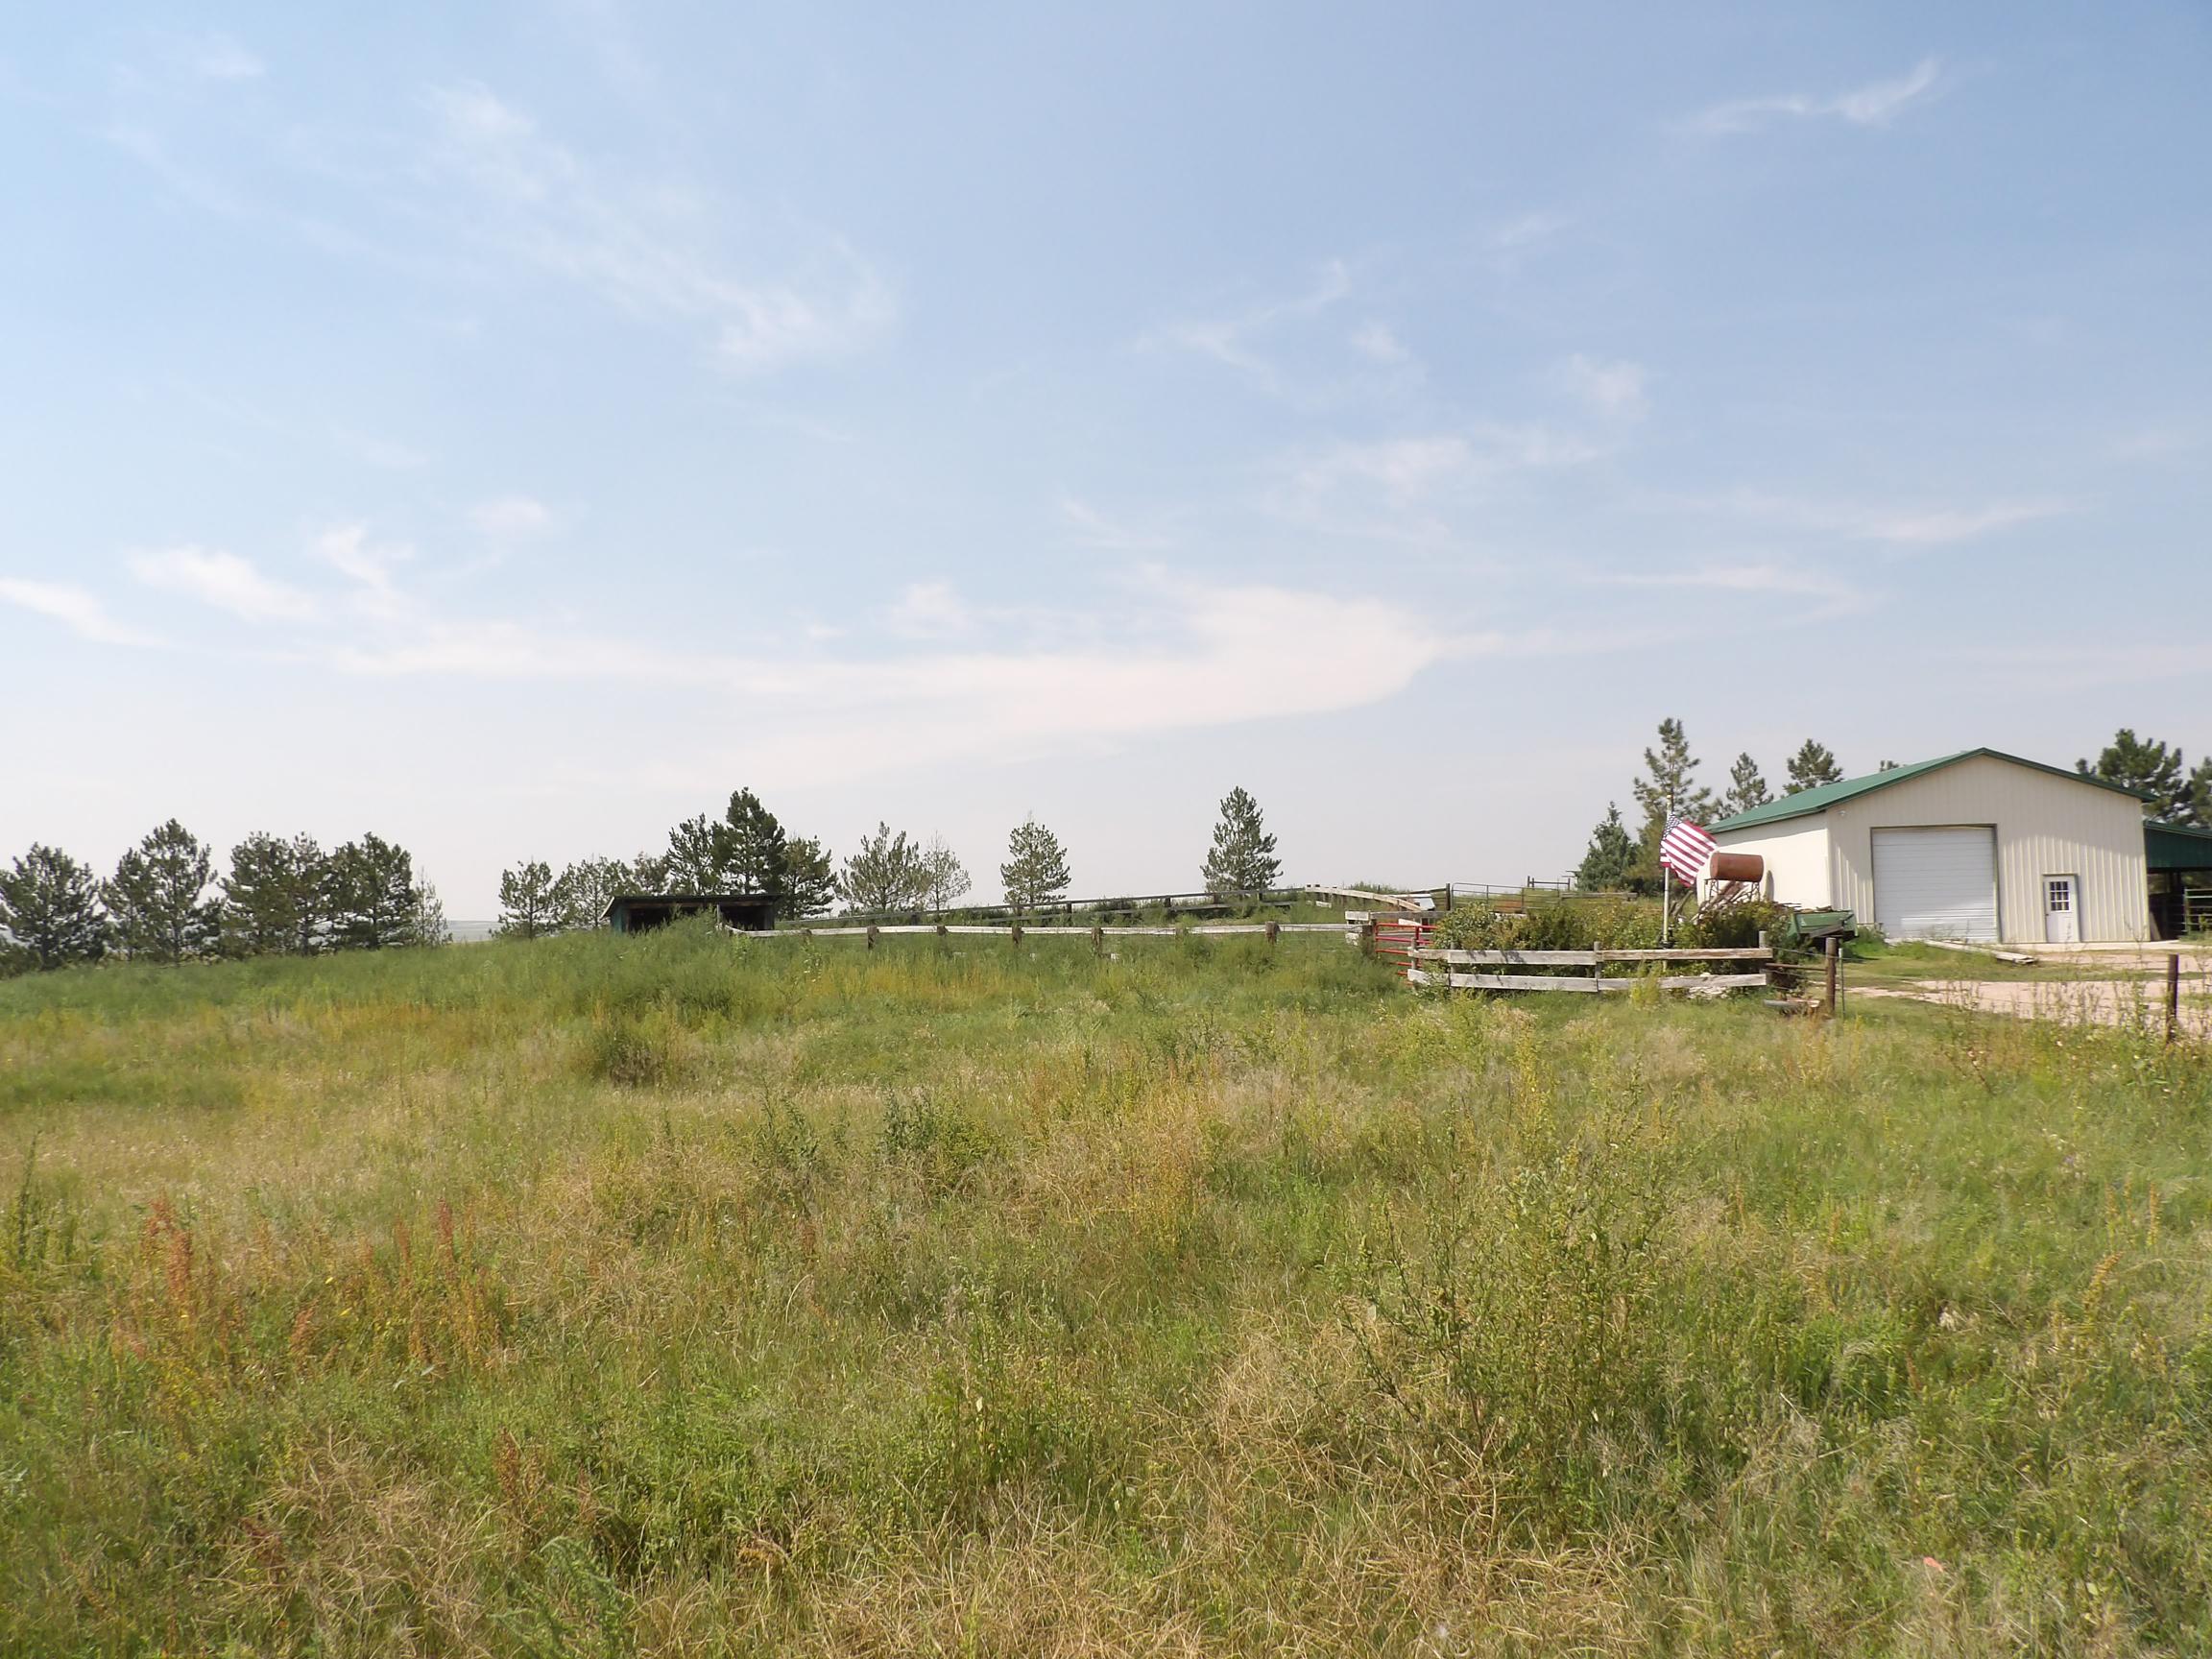 Home and land for sale along Chadron Creek, Chadron, NE